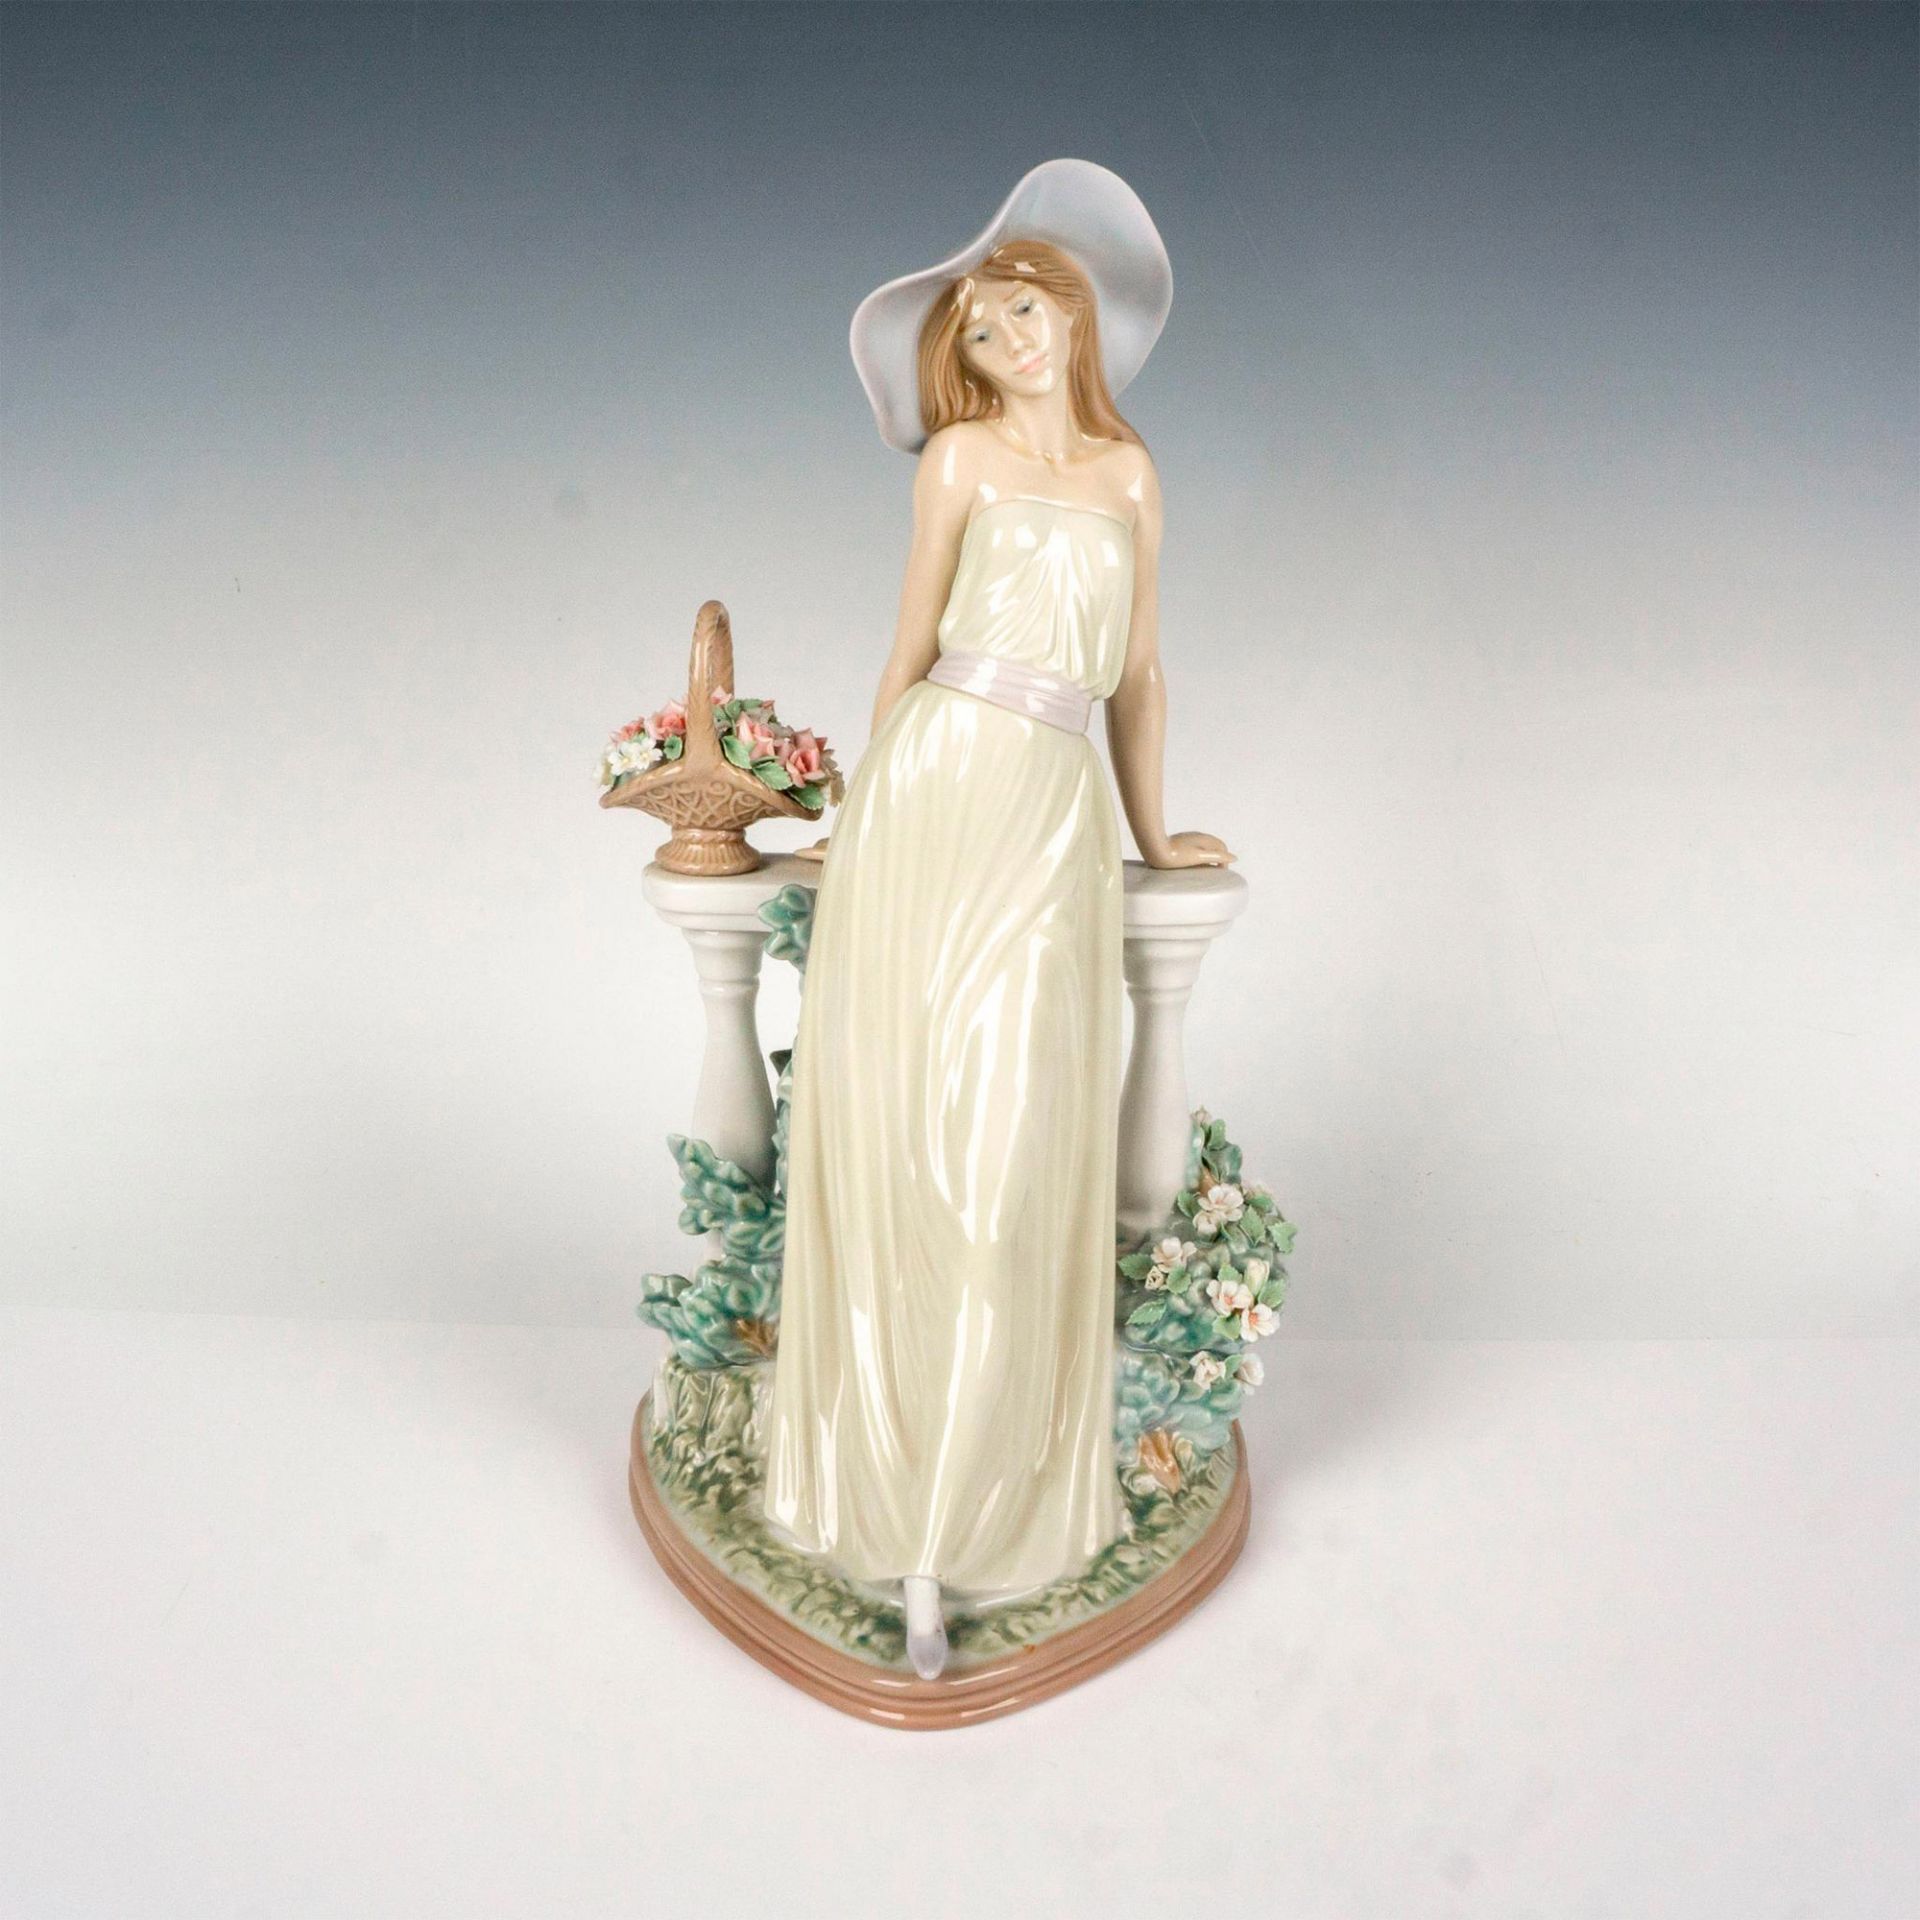 Time for Reflection 1005378 - Lladro Figurine